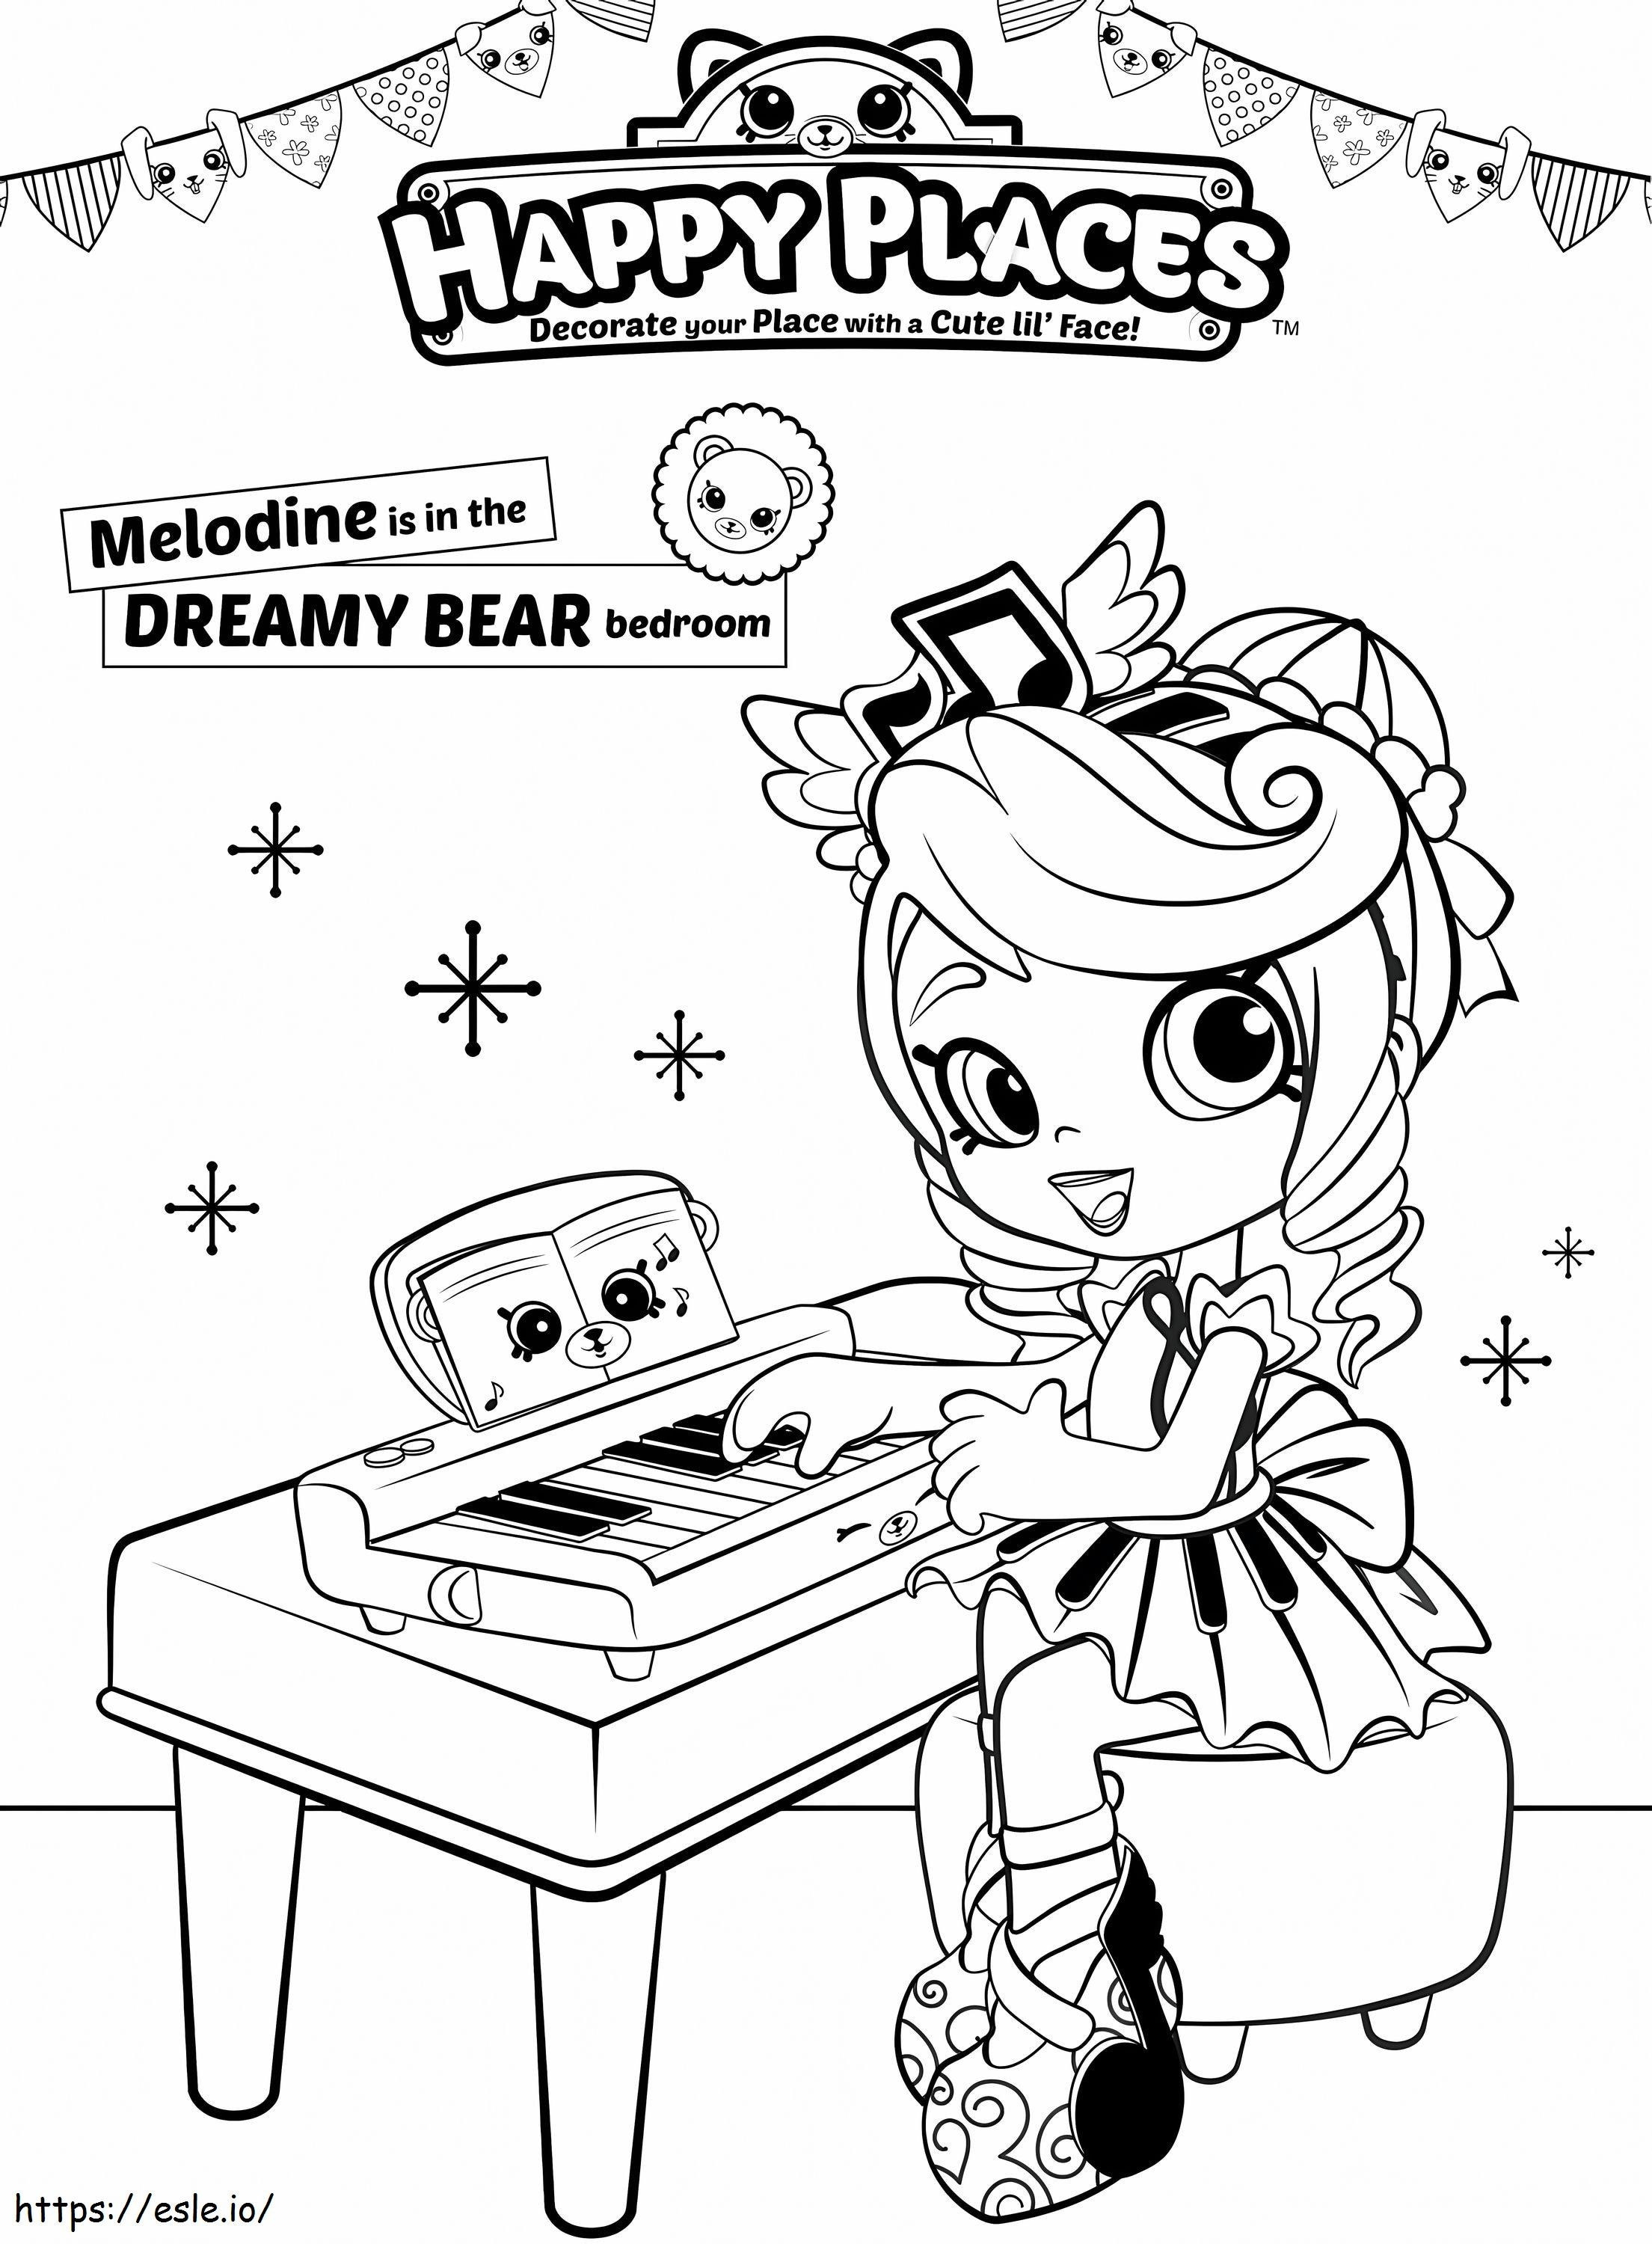 Melodine Shopkins Shoppies coloring page